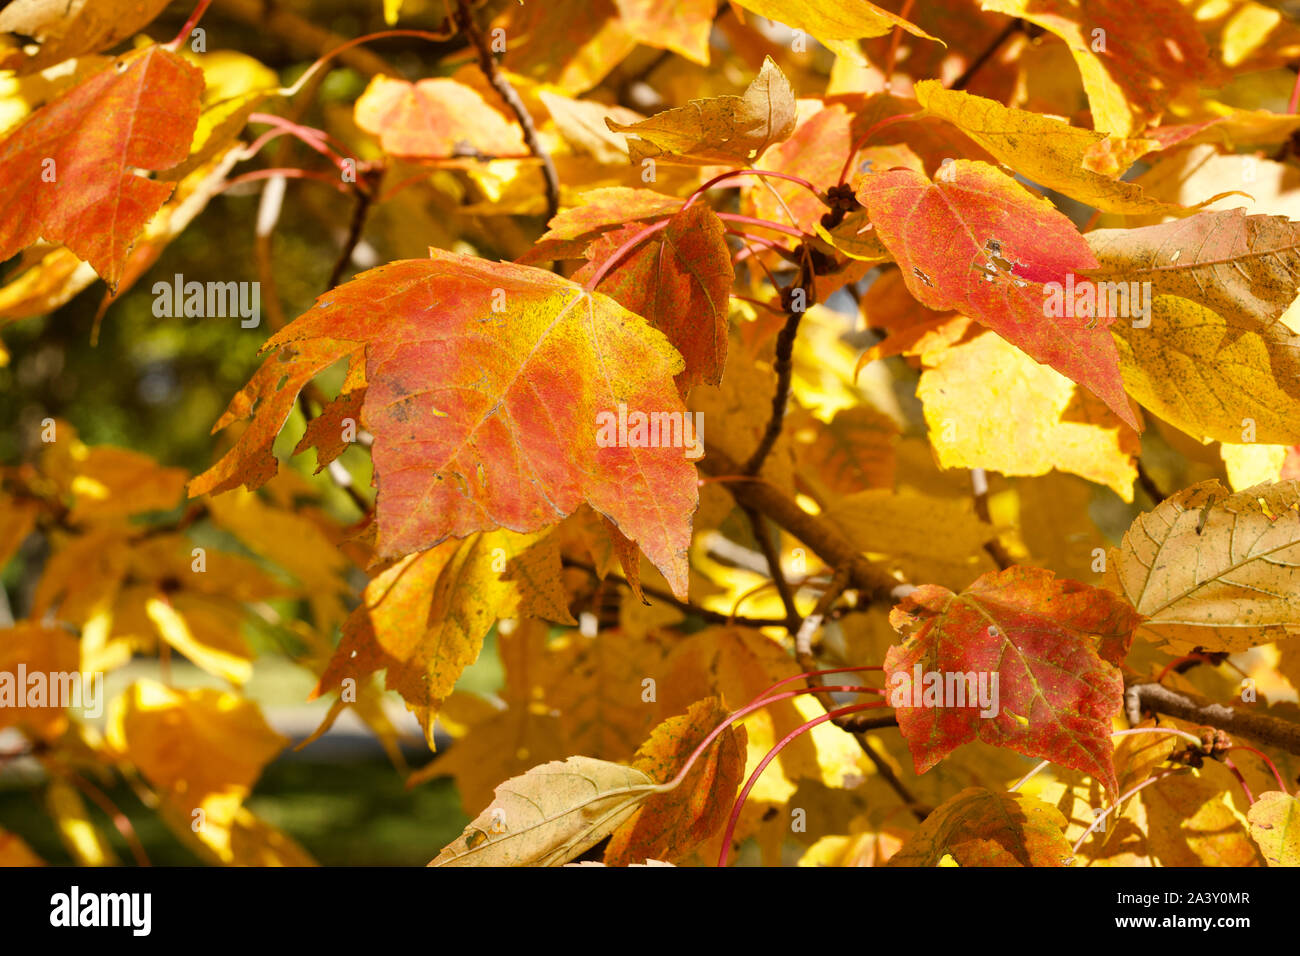 Close up view of red maple tree leaves (acer rubrum) showing early fall colors Stock Photo